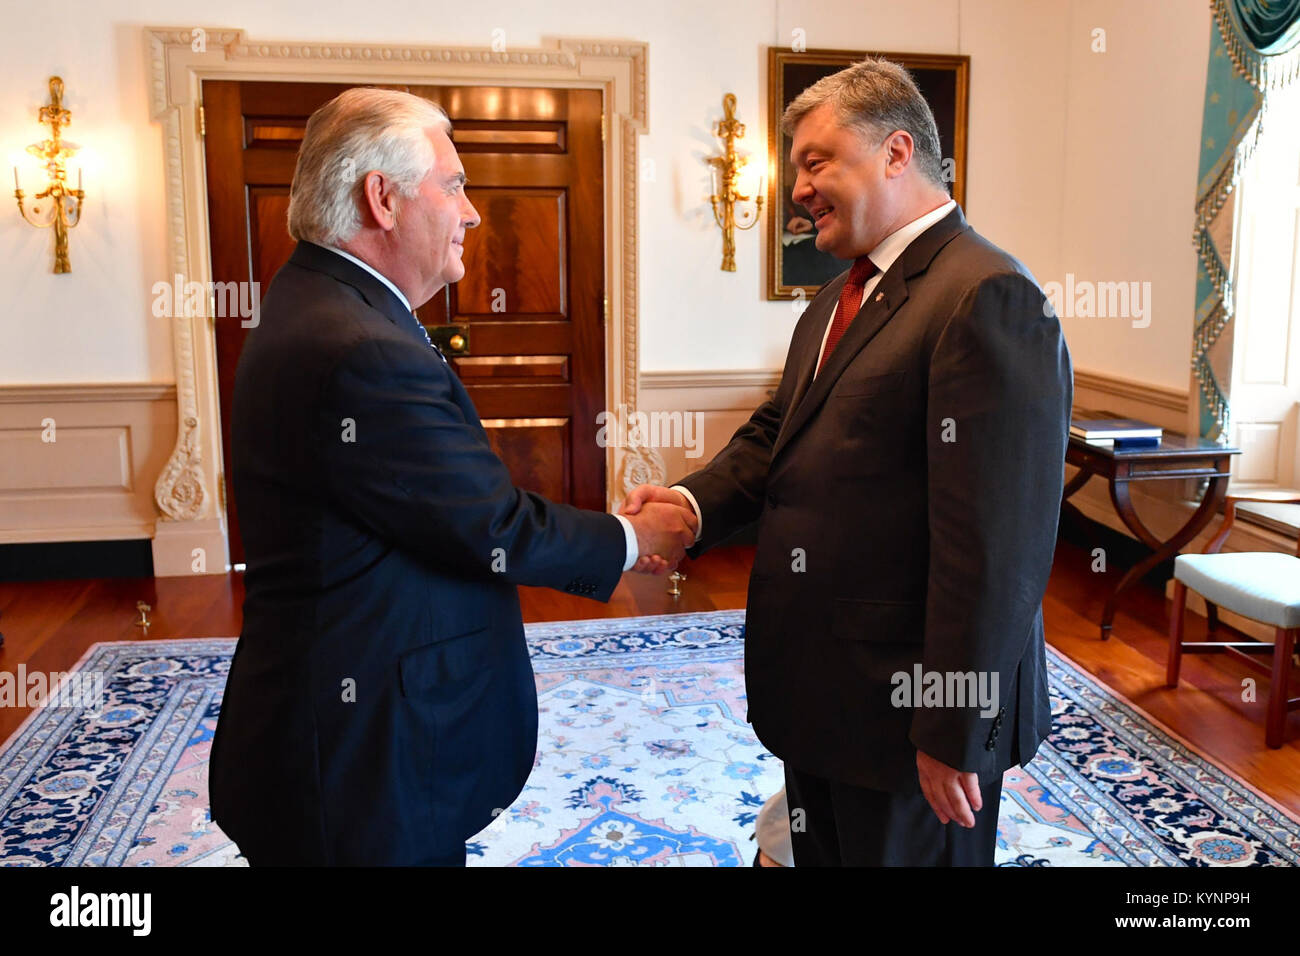 U.S. Secretary of State Rex Tillerson greets Ukrainian President Petro Poroshenko before their bilateral meeting at the U.S. Department of State in Washington, D.C., on June 20, 2017. Secretary Tillerson Greets Ukrainian President Poroshenko Before Their Meeting in 34589501634 o Stock Photo